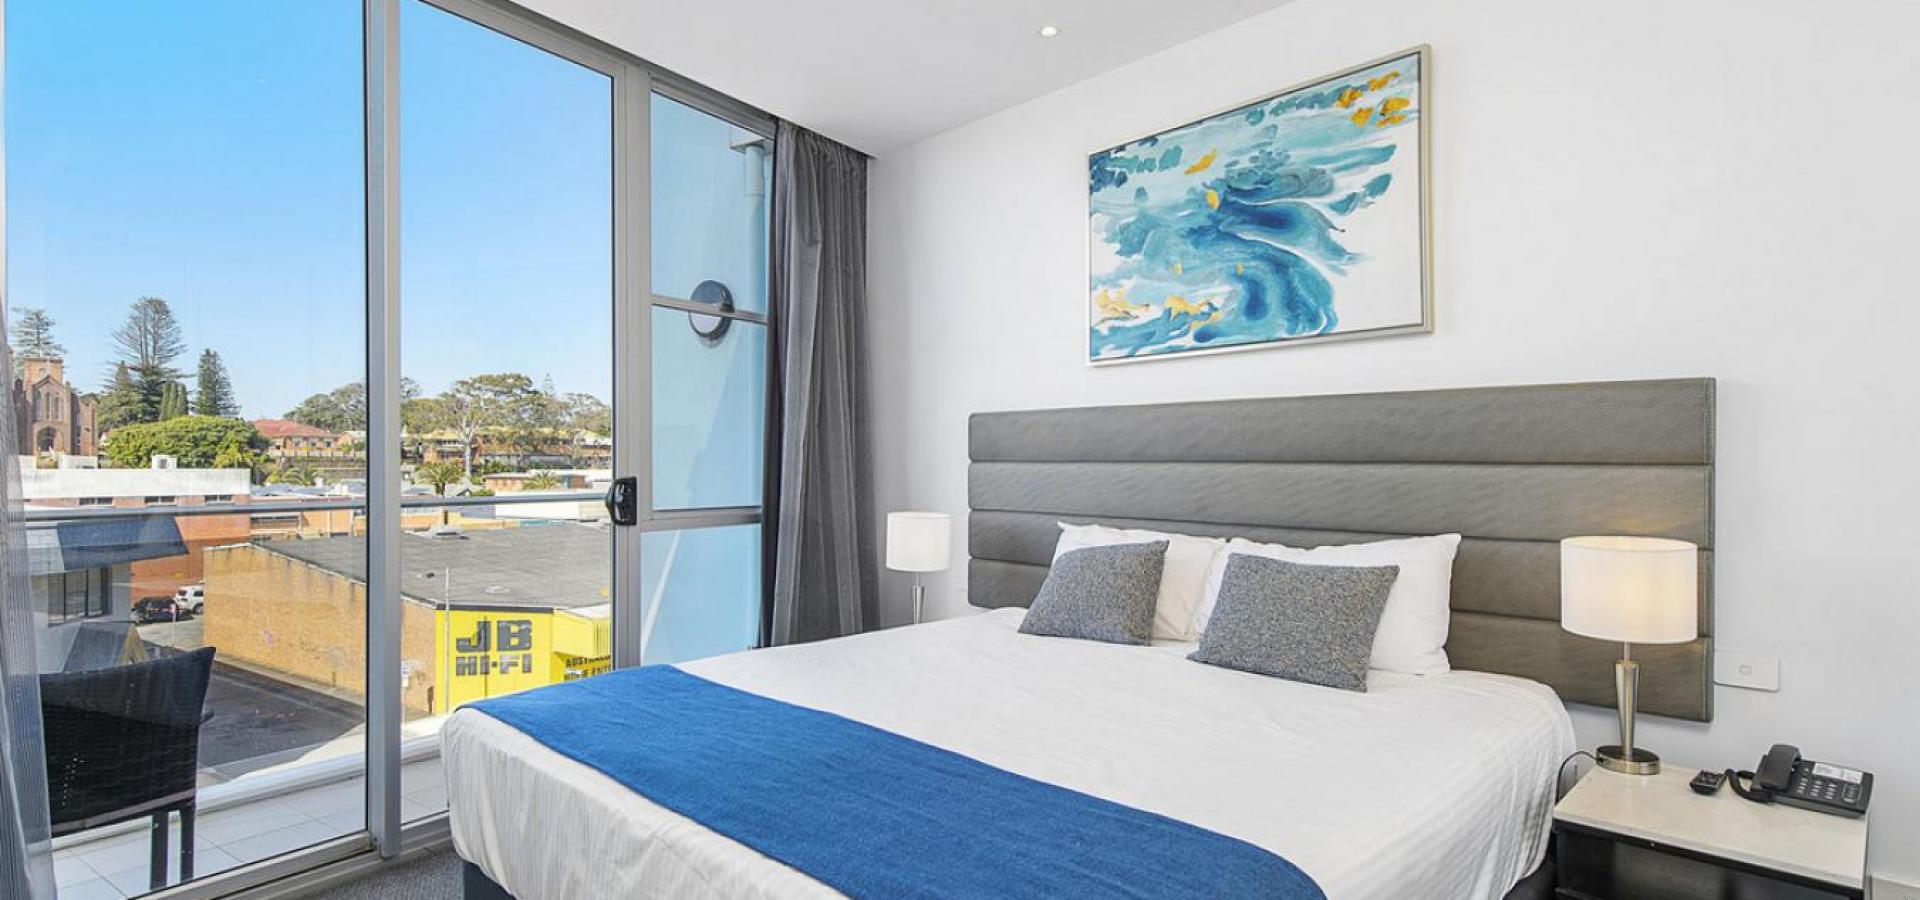 Prime Holiday Apartment In The Heart Of The CBD